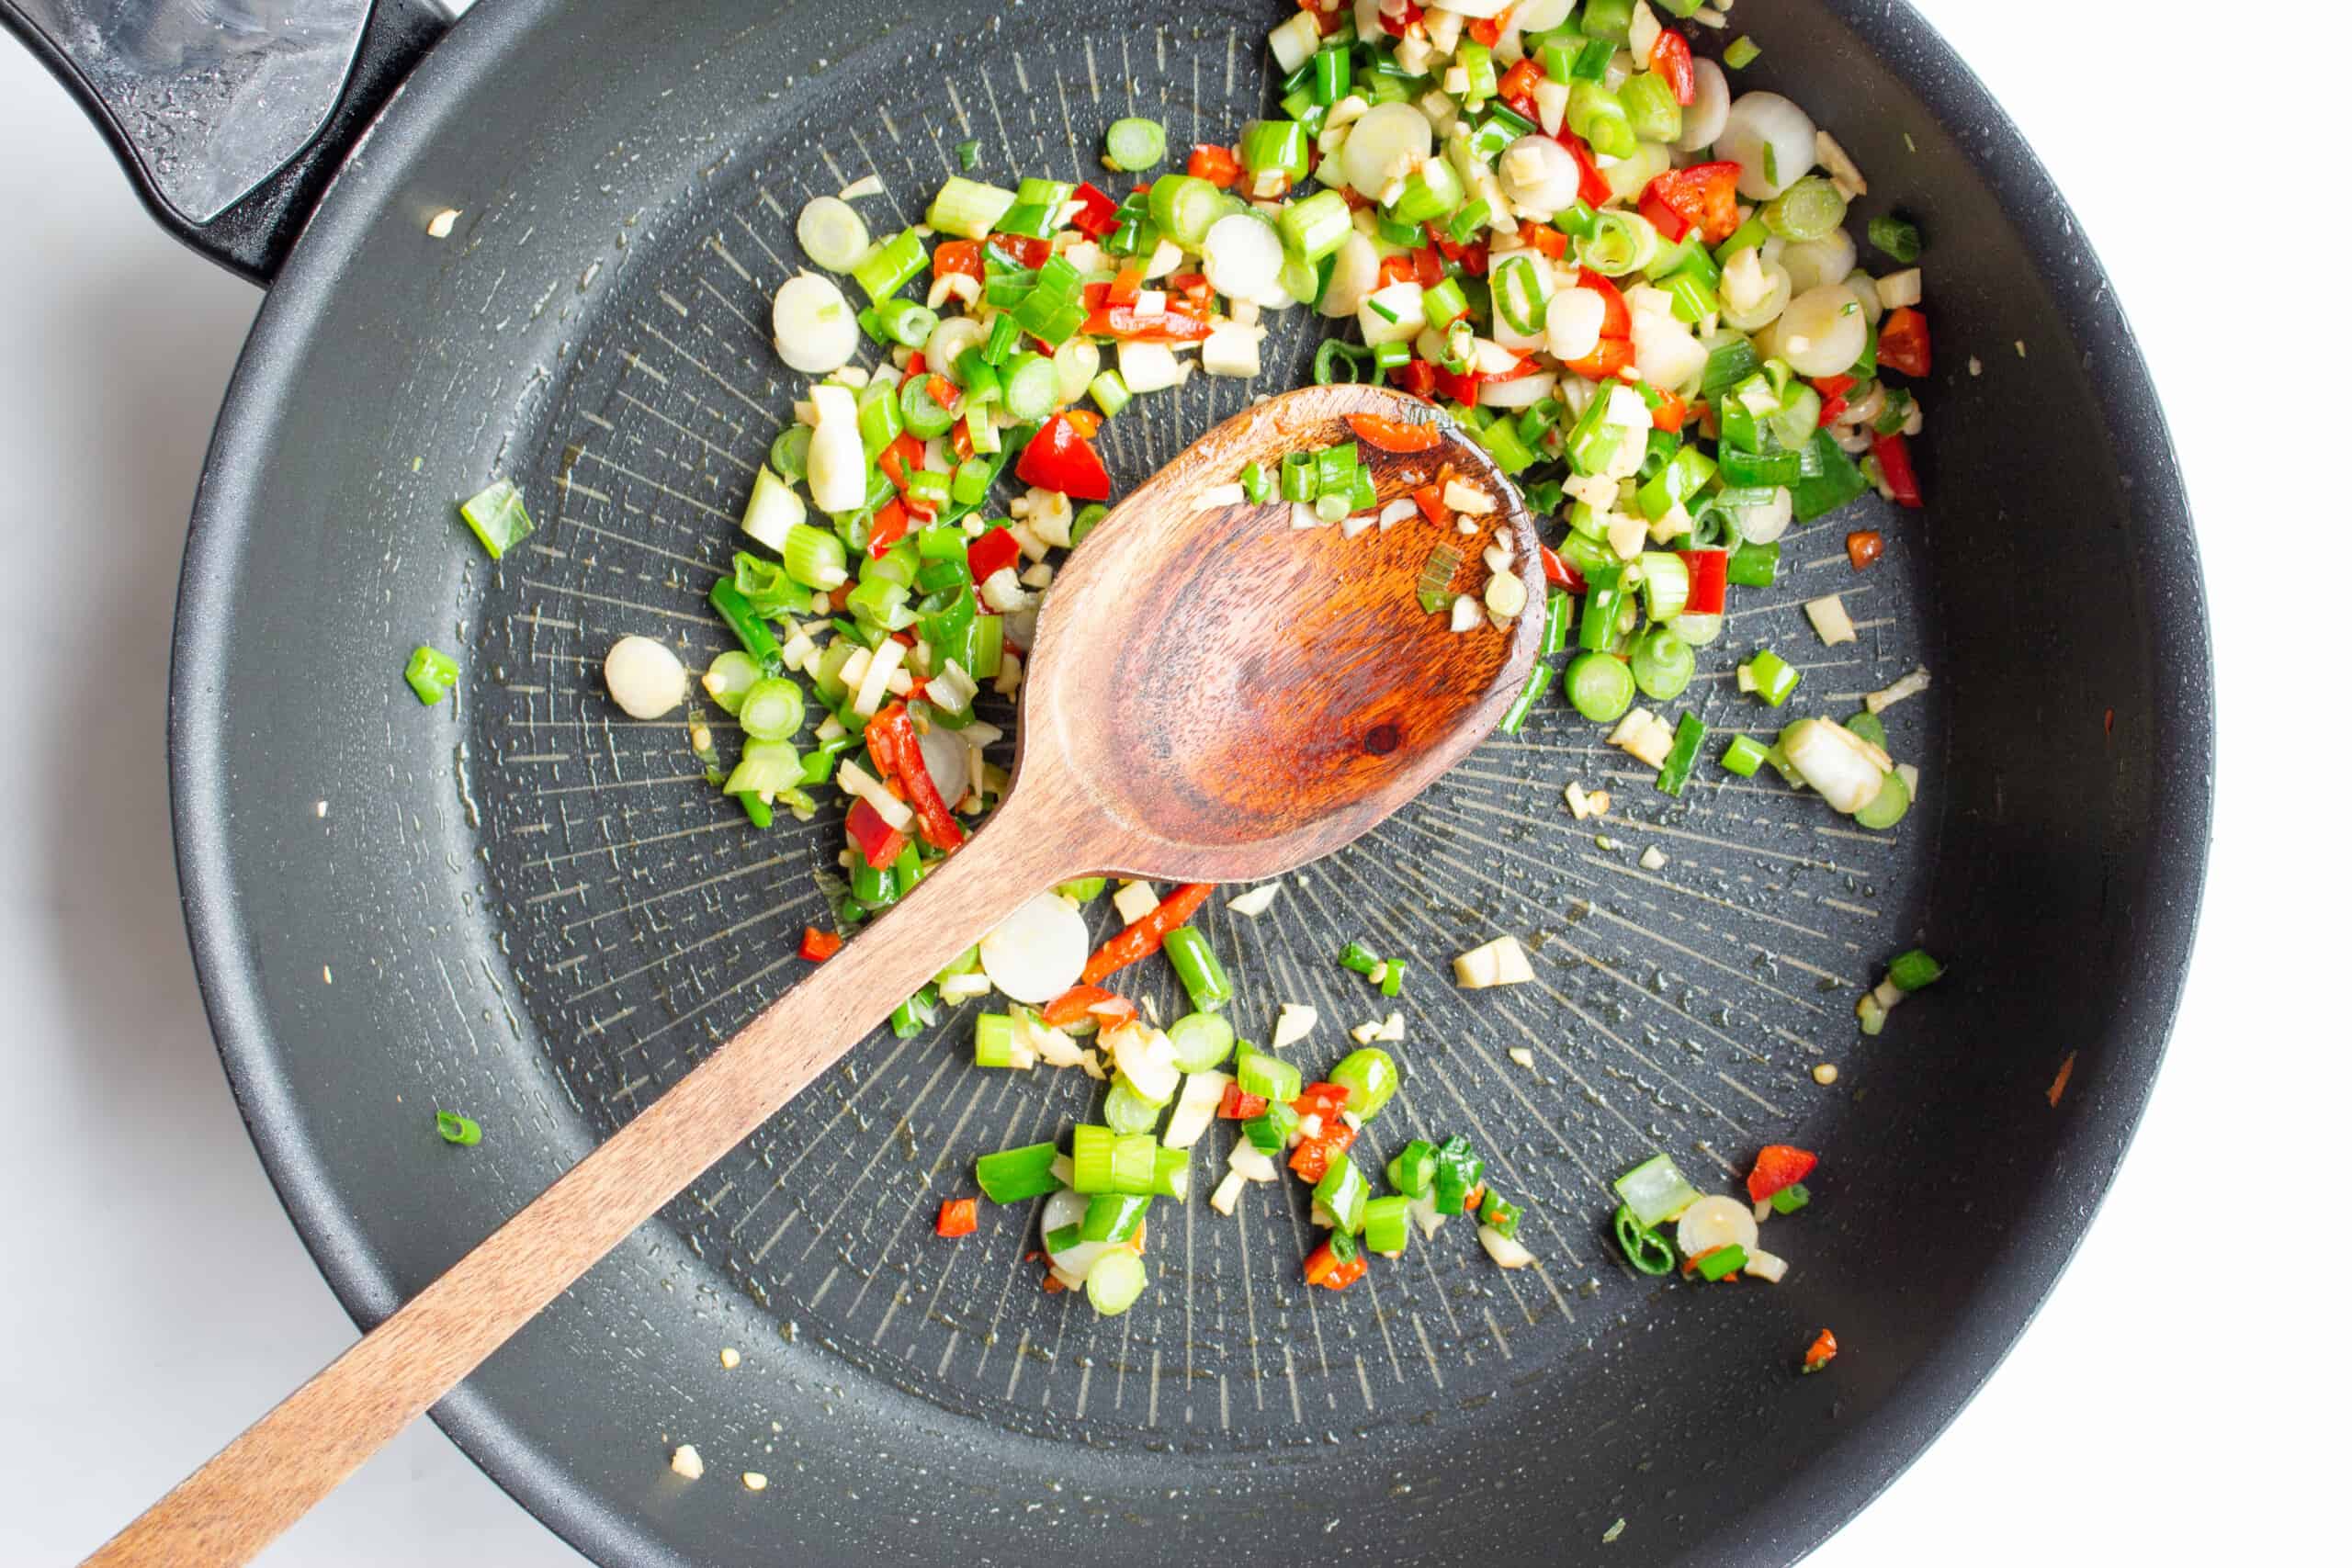 Chillies, garlic and spring onions in pan